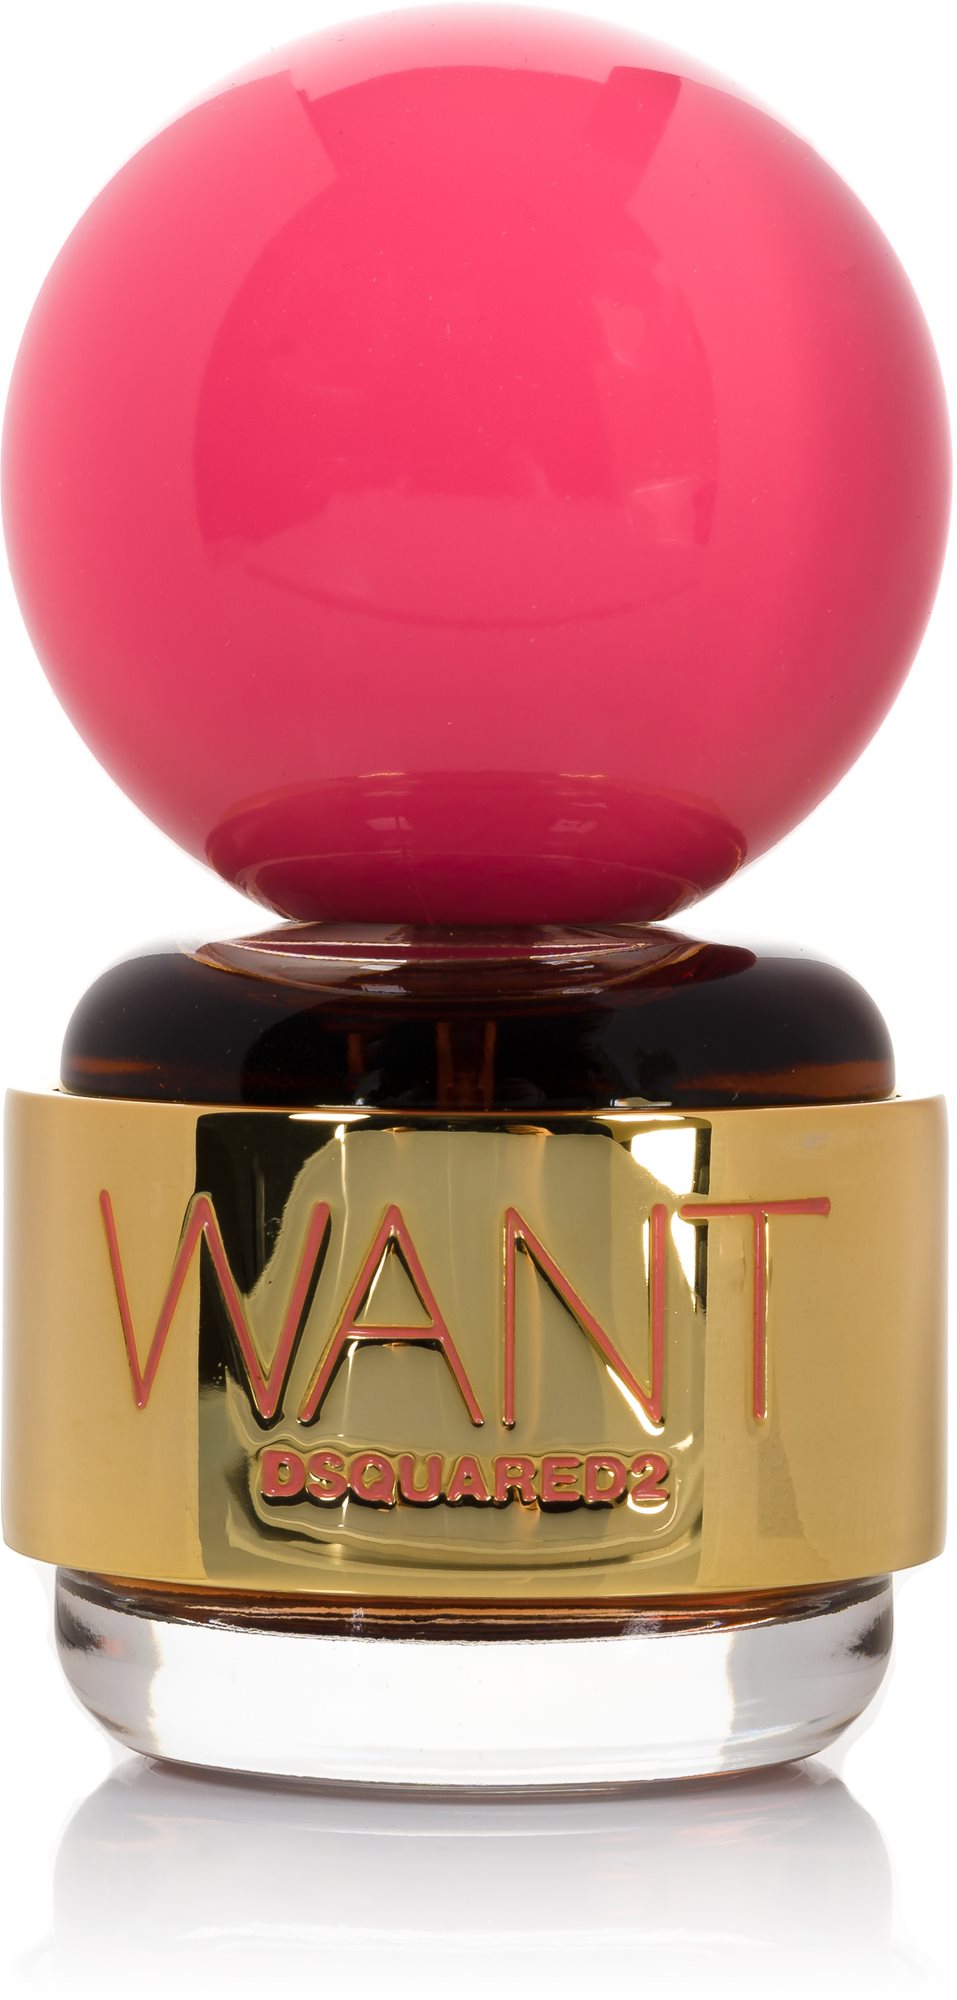 DSQUARED2 Want Pink Ginger EdP 50 ml